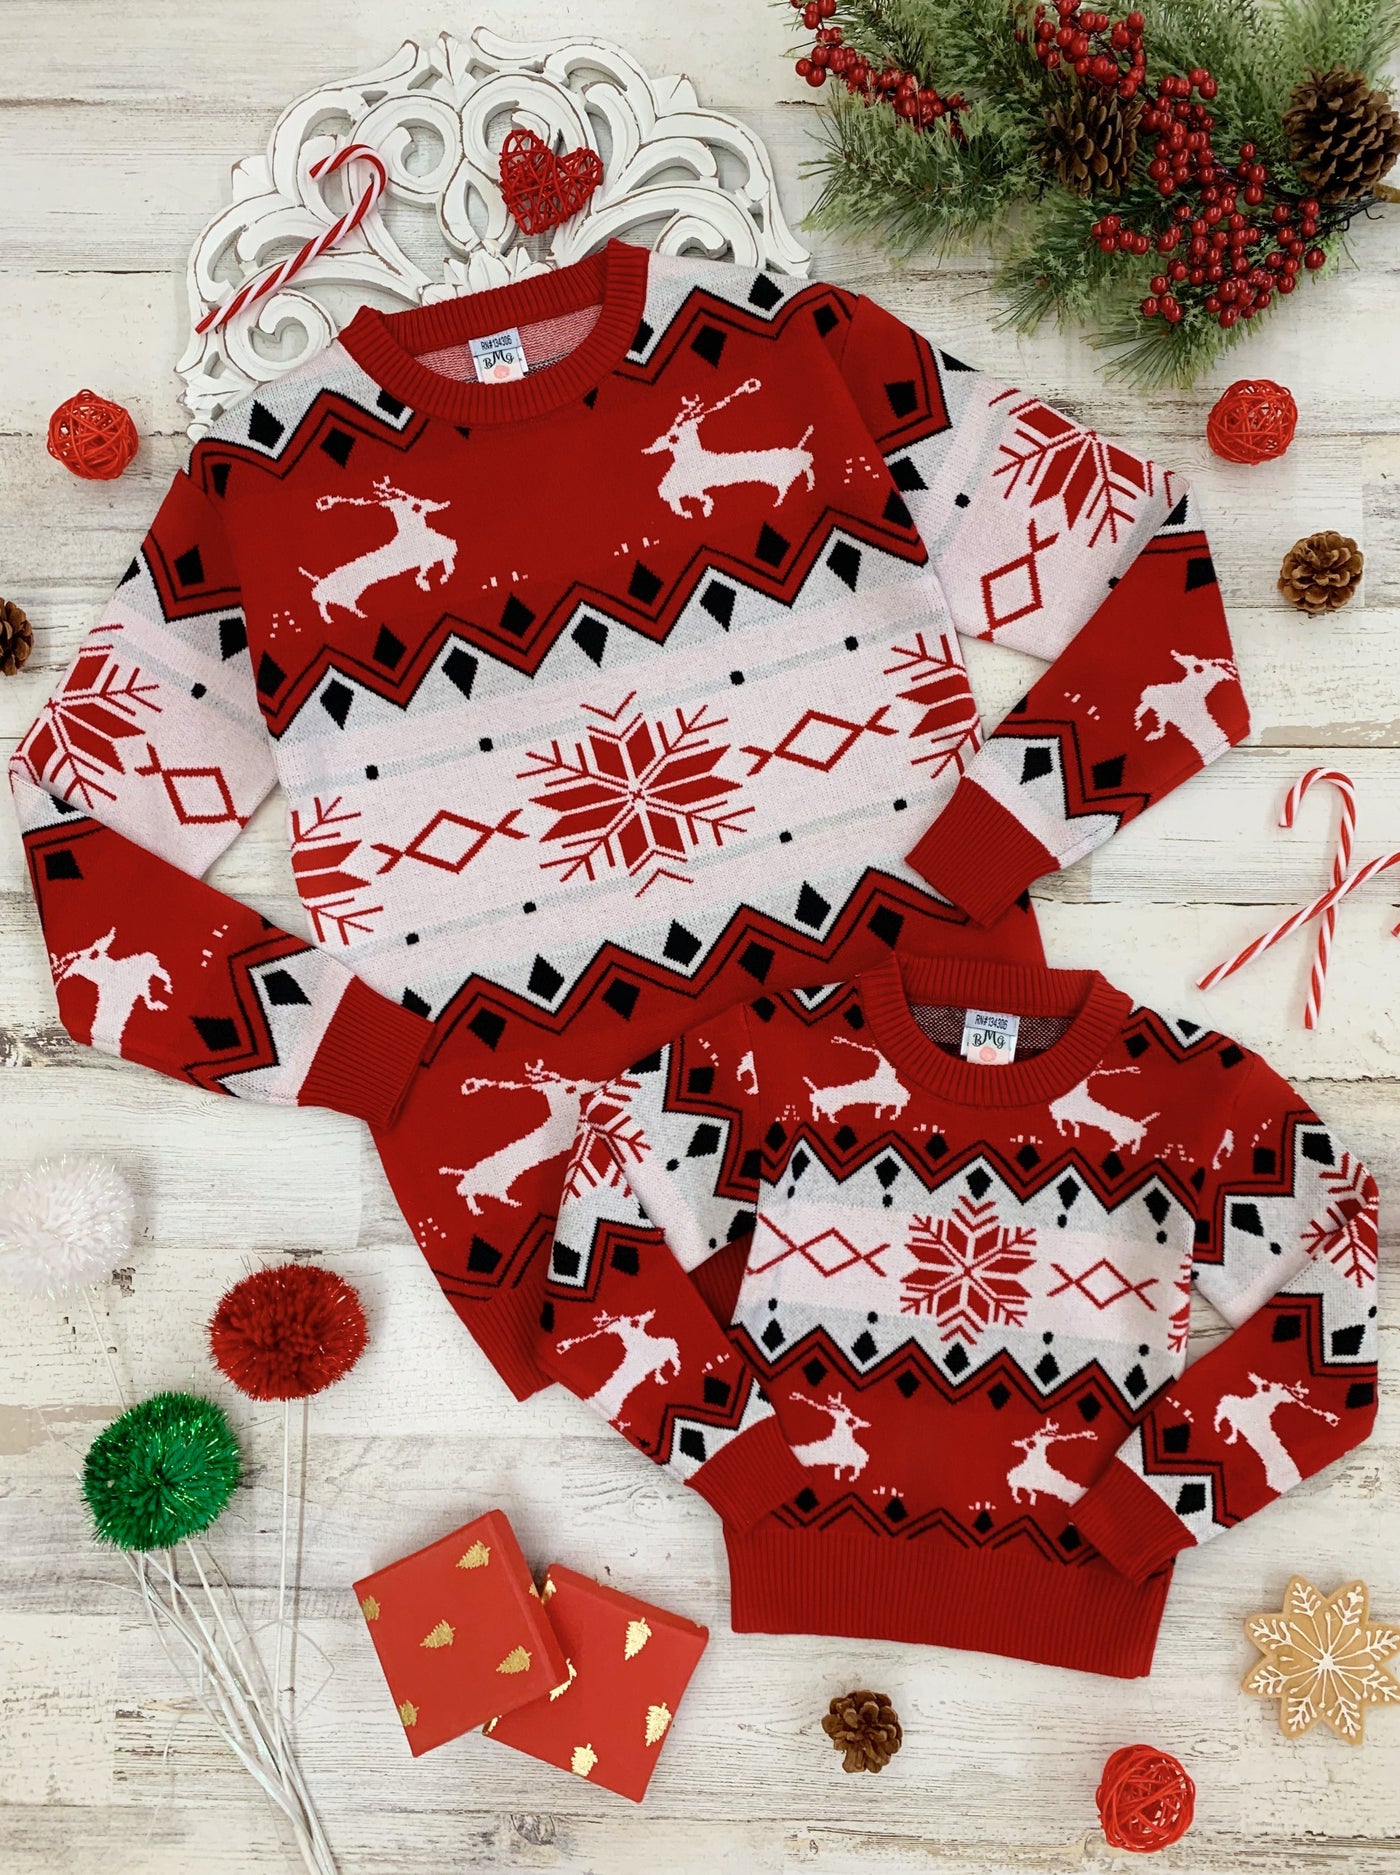 Mommy and Me Matching Tops | Winter Reindeer Print Knit Sweaters